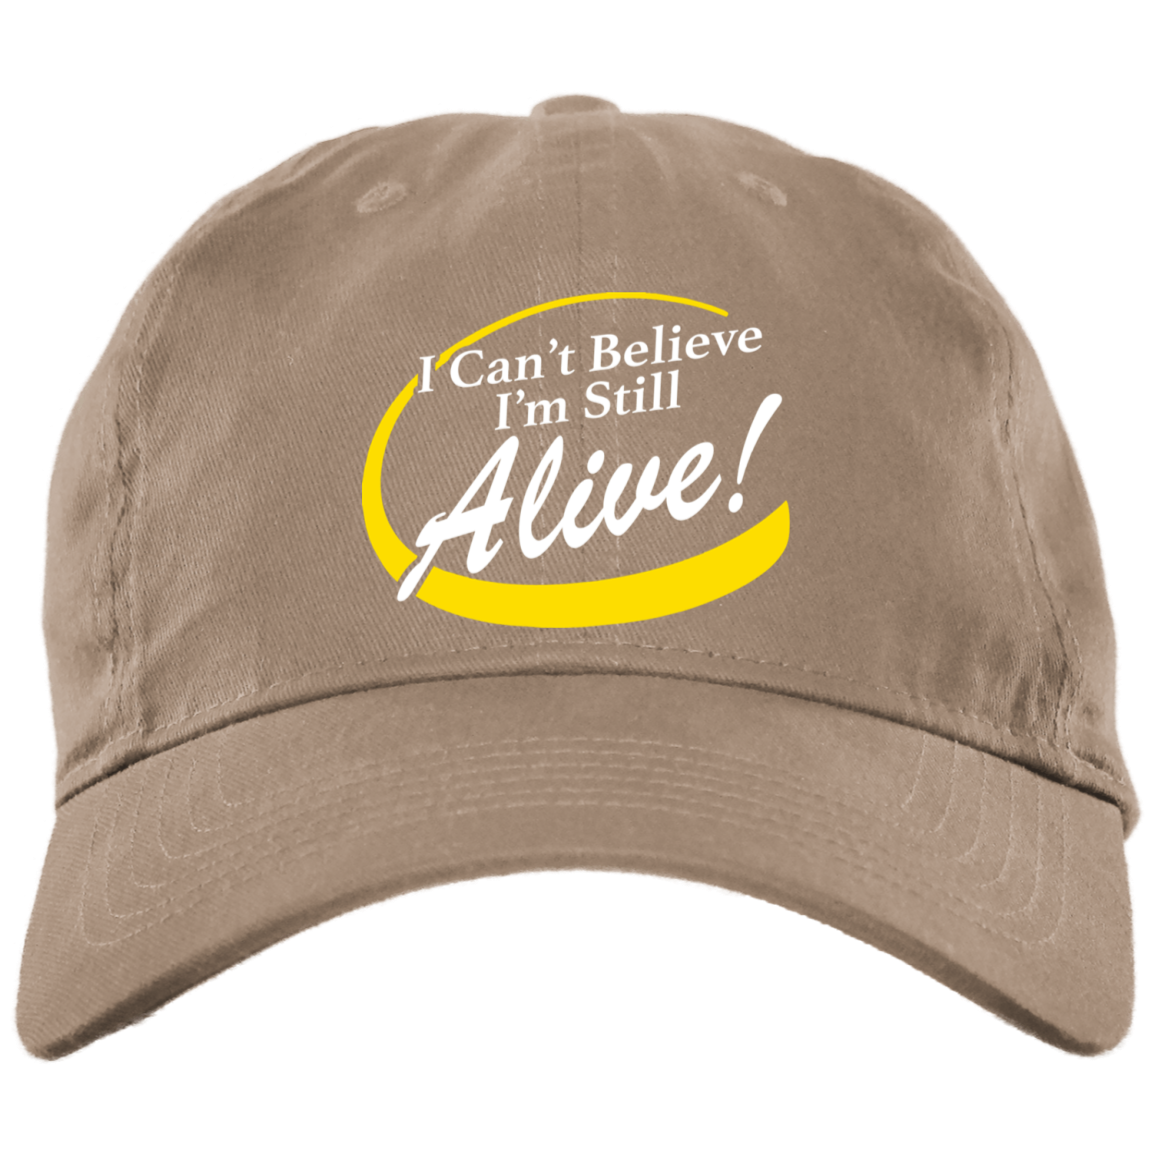 I Can't Believe I'm Still Alive! Hat